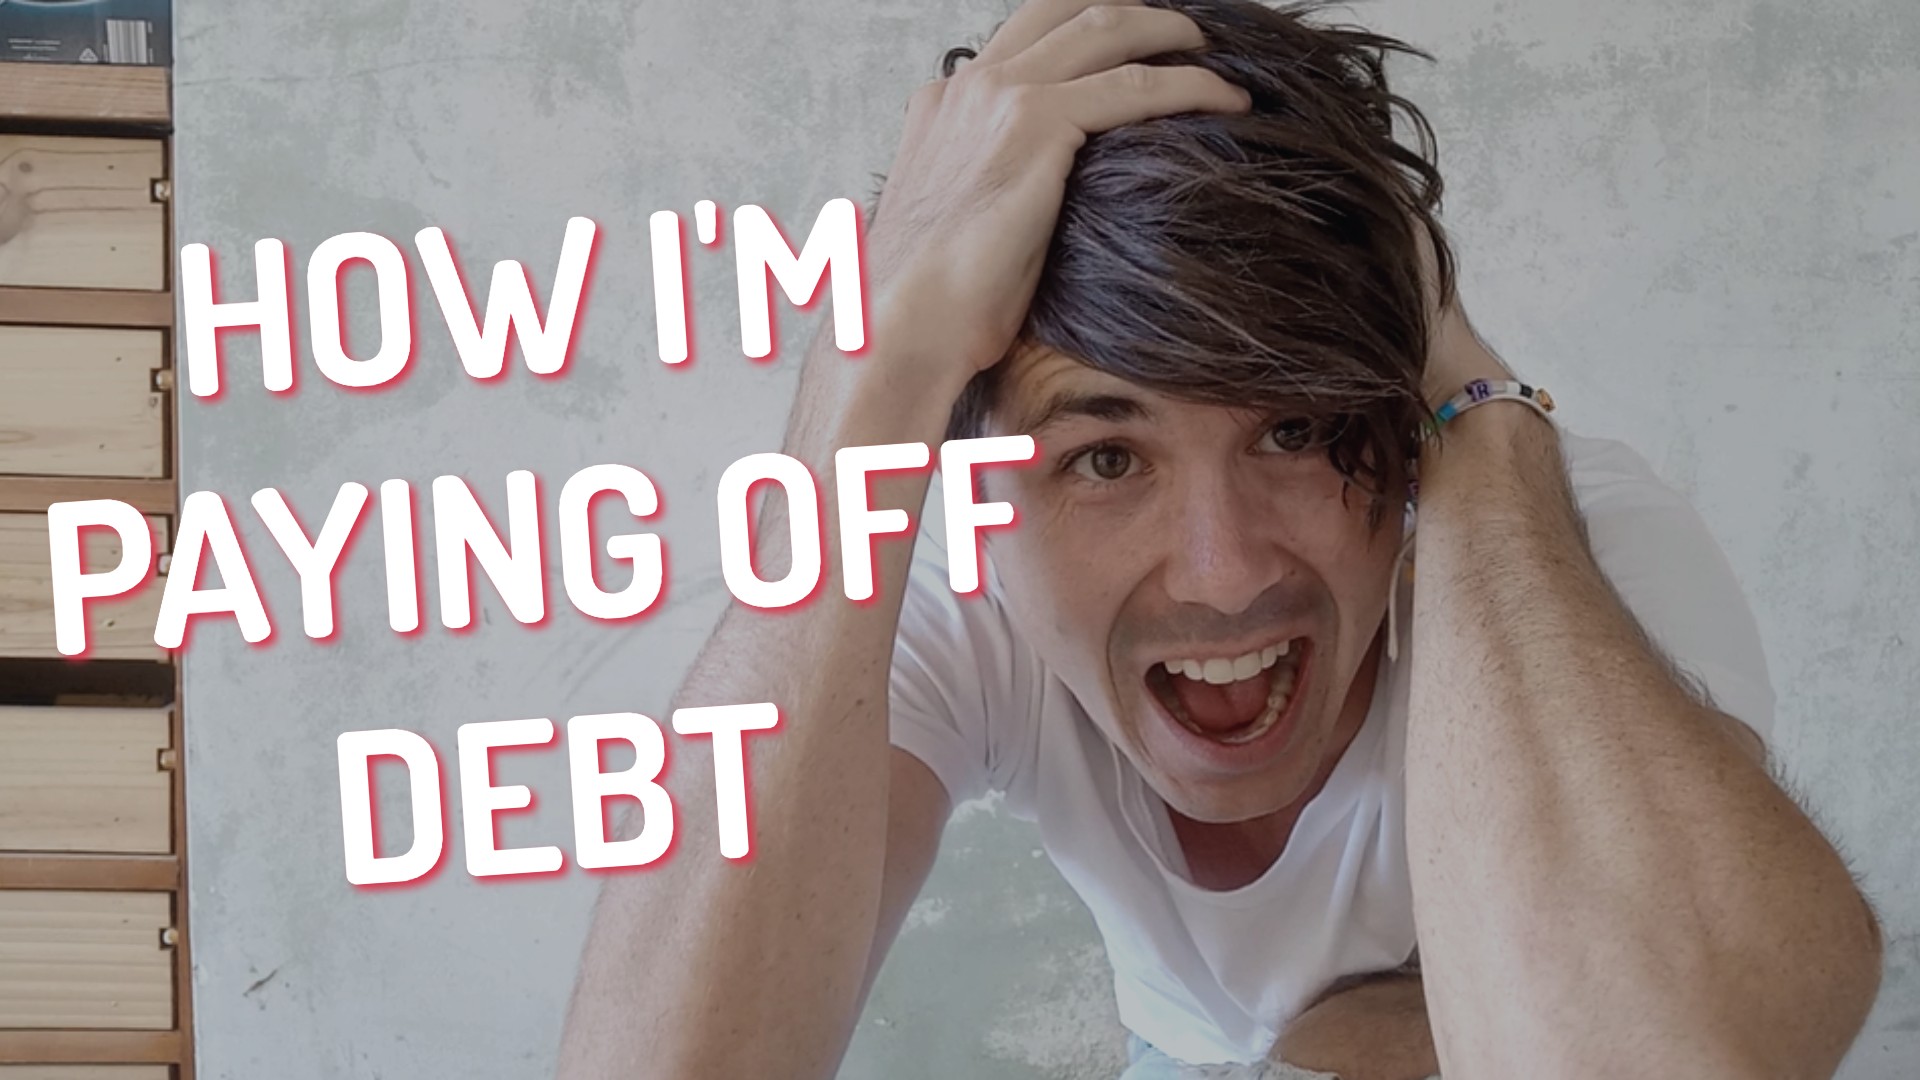 How Im Paying Off Debt